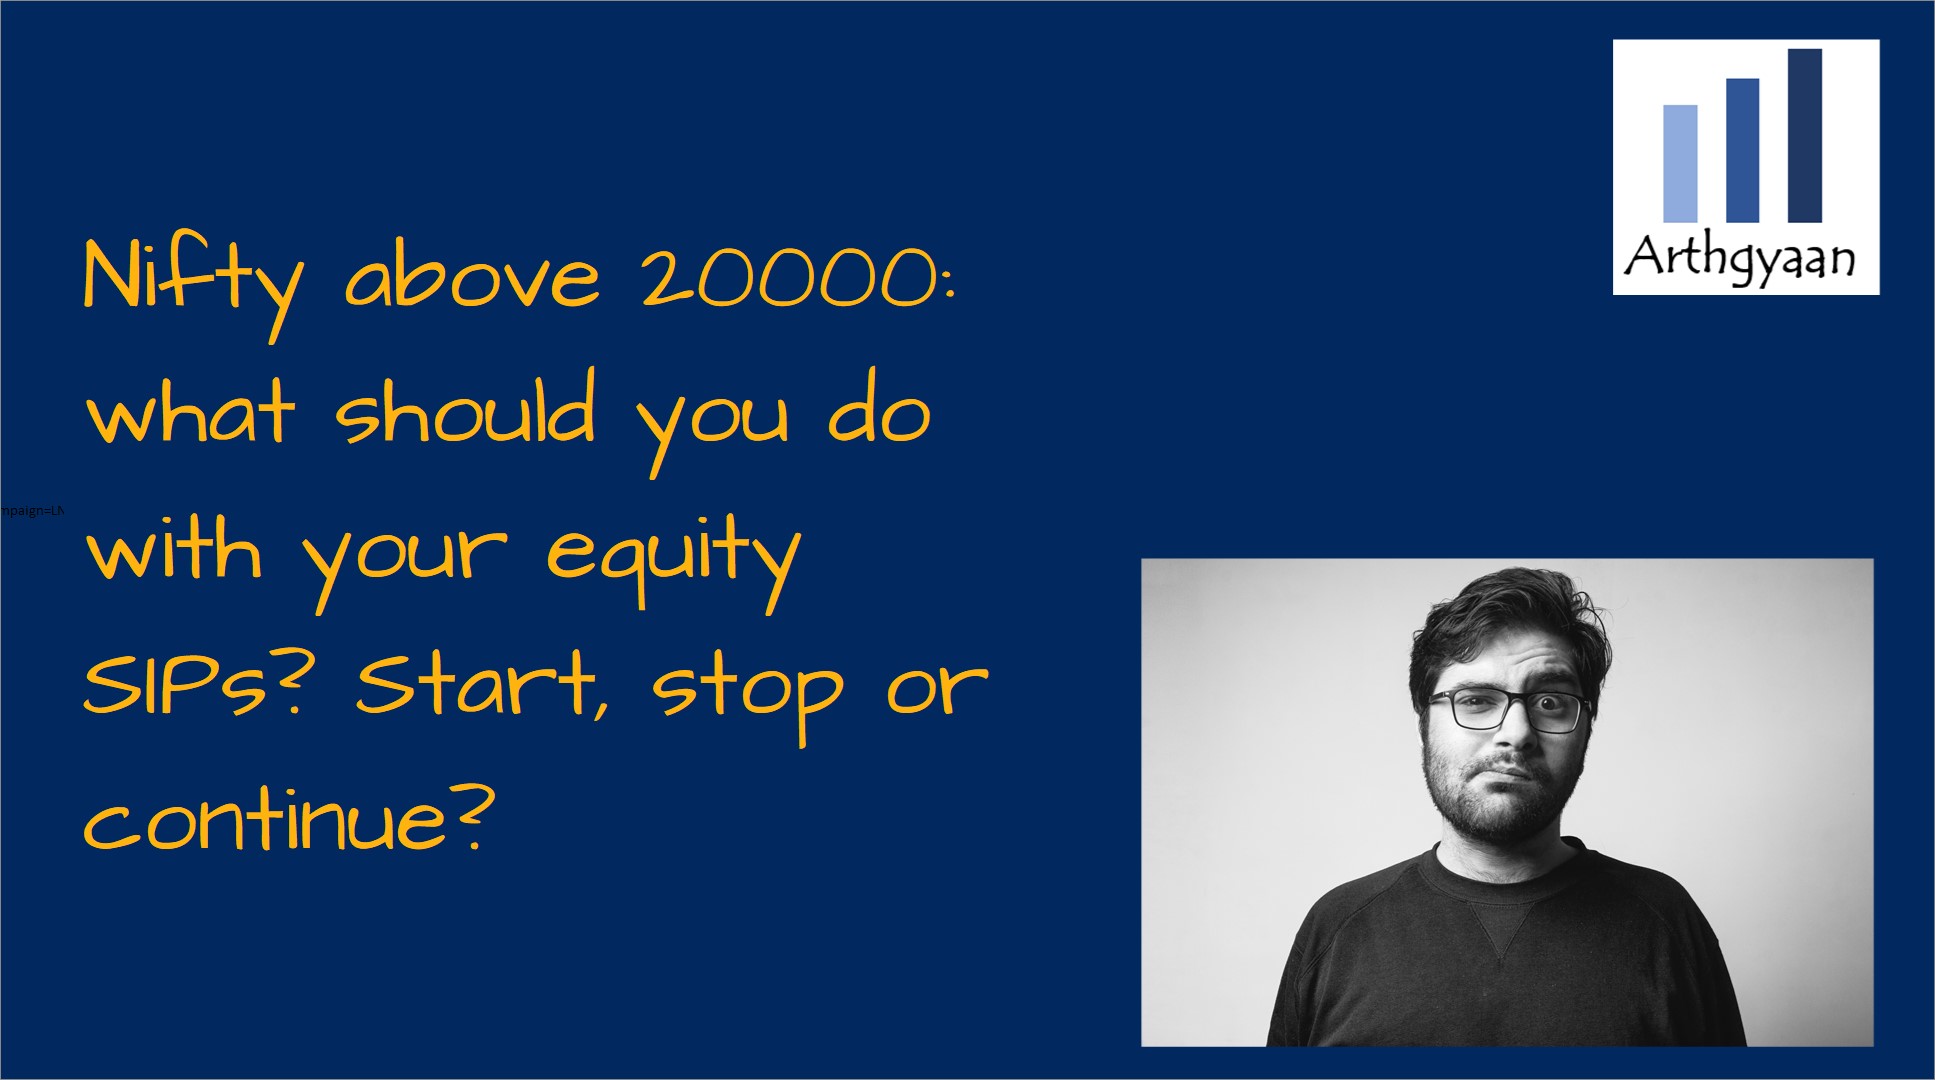 Nifty above 20000: what should you do with your equity SIPs? Start, stop or continue?